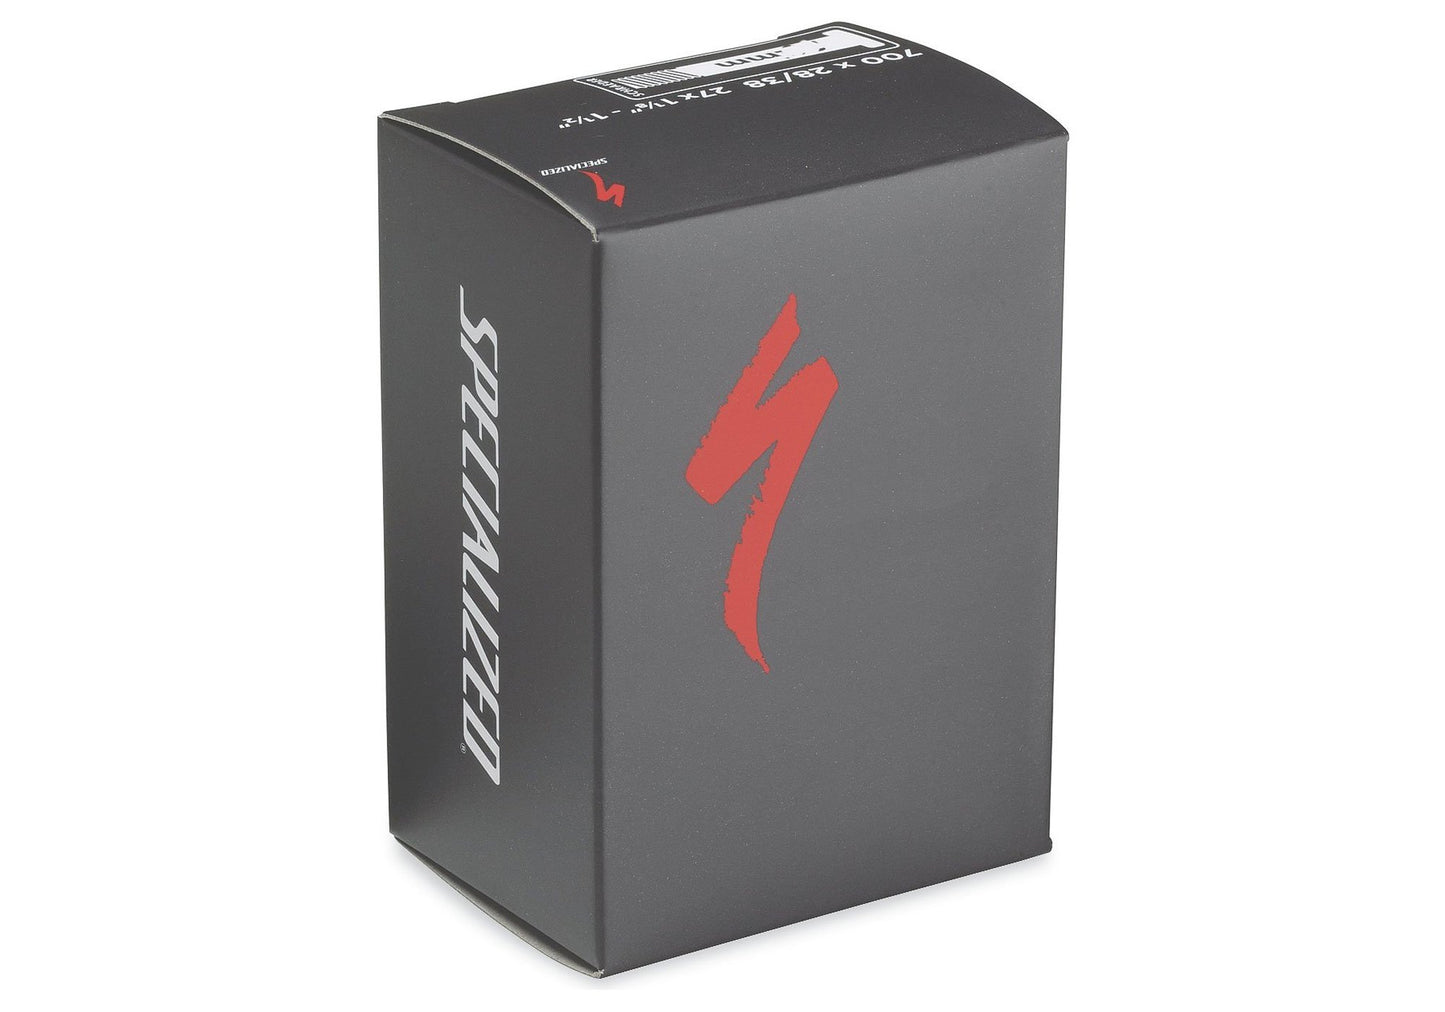 Specialized Schrader Valve Bicycle Tube 700 x 32-50mm - 40mm valve length